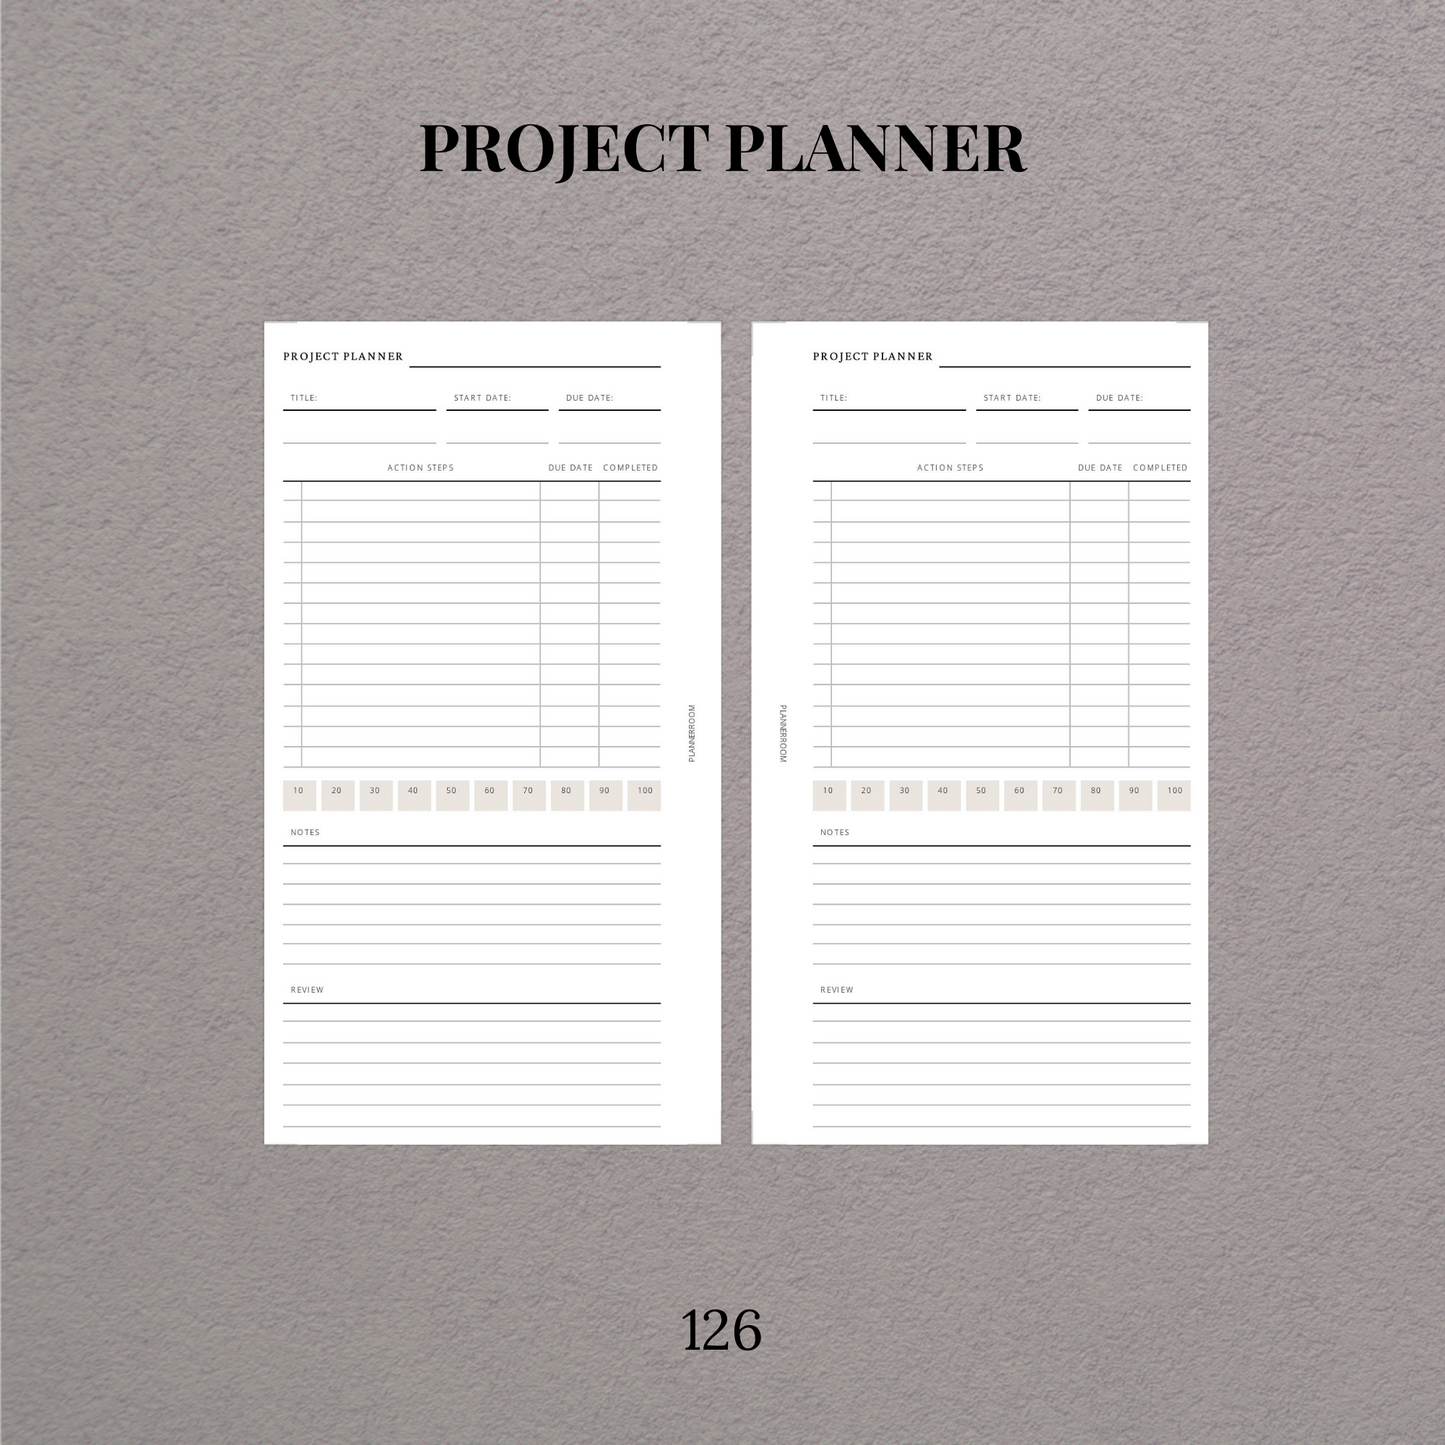 Project planner | Printable inserts - 126